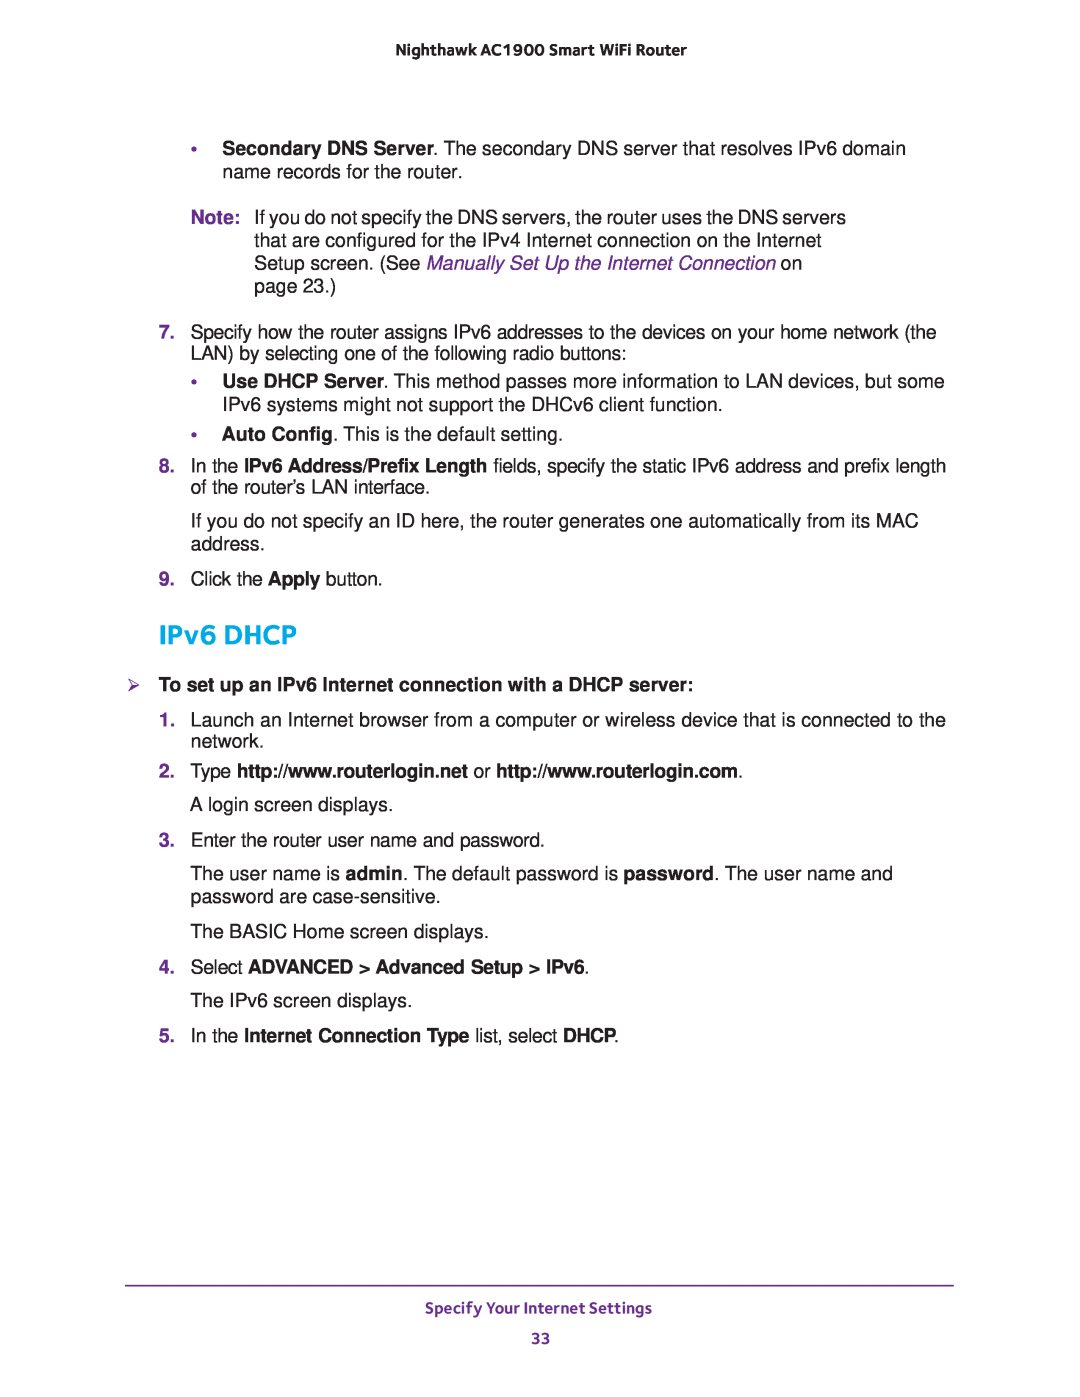 NETGEAR Model R7000 user manual IPv6 DHCP,  To set up an IPv6 Internet connection with a DHCP server 